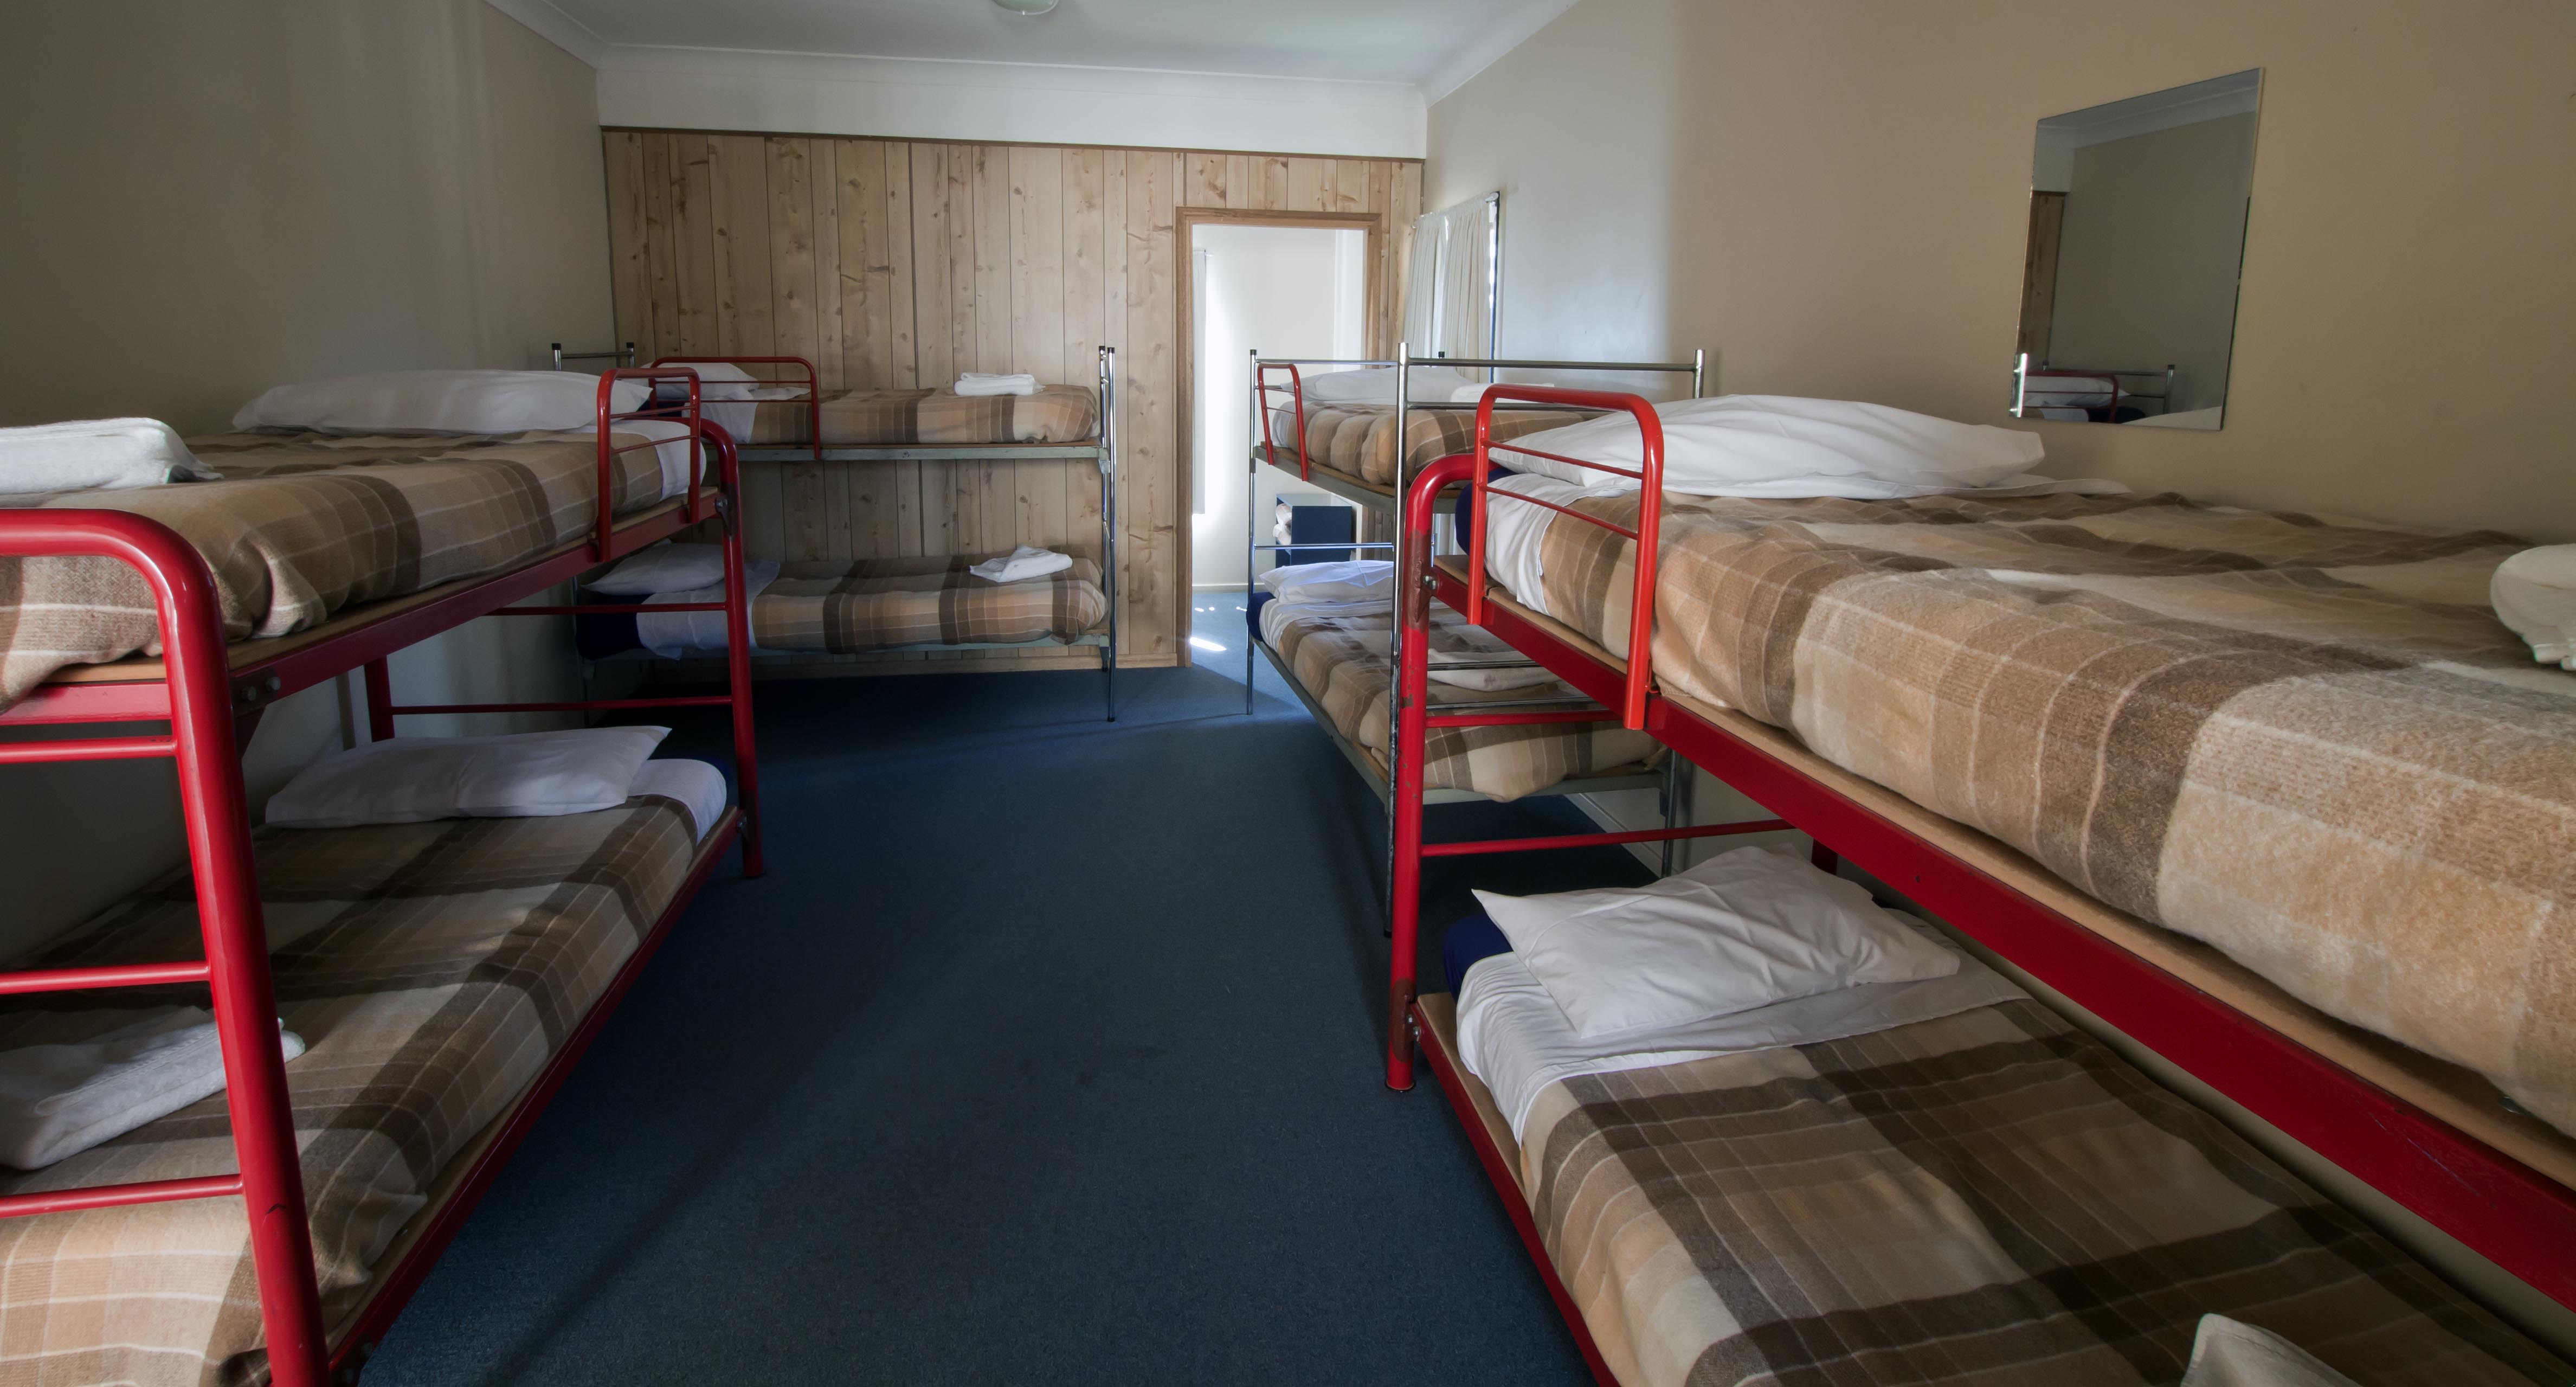 Comfortable dormitory style lodging